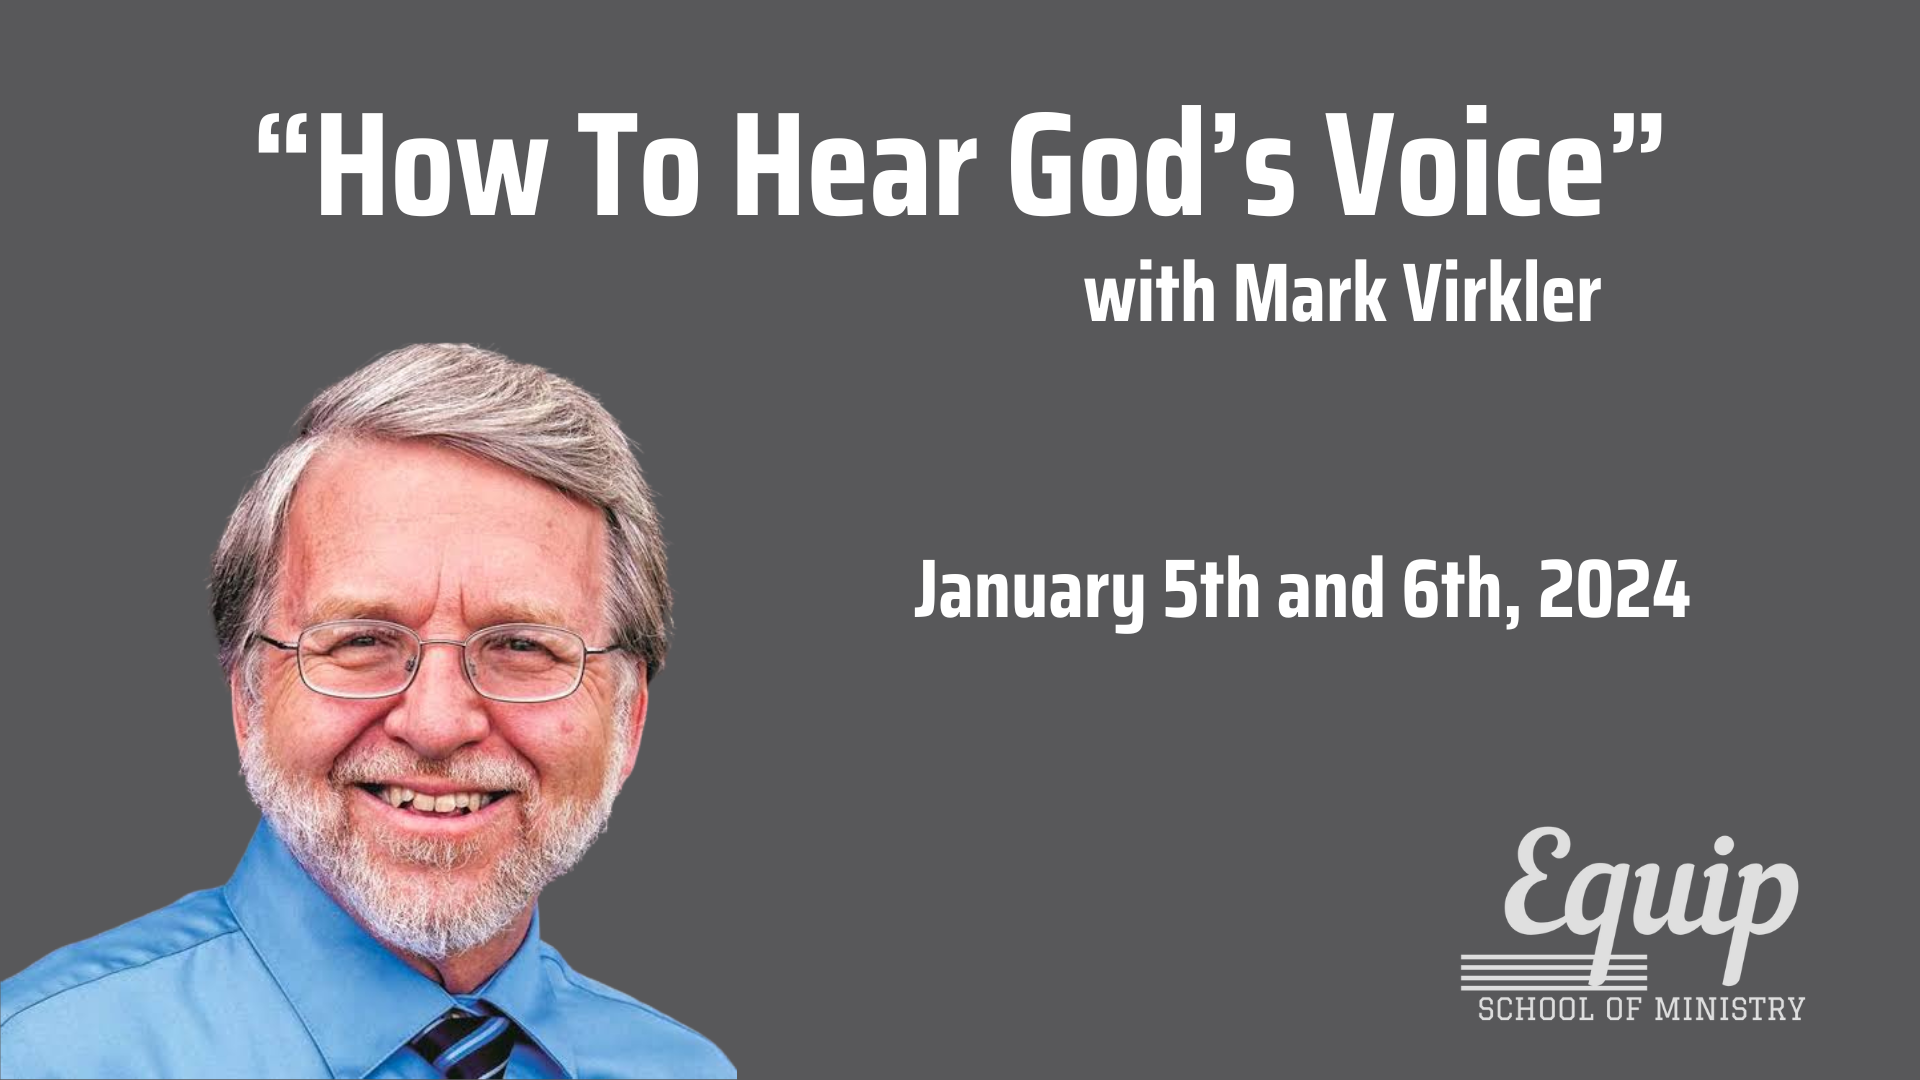 “How To Hear God’s Voice” image